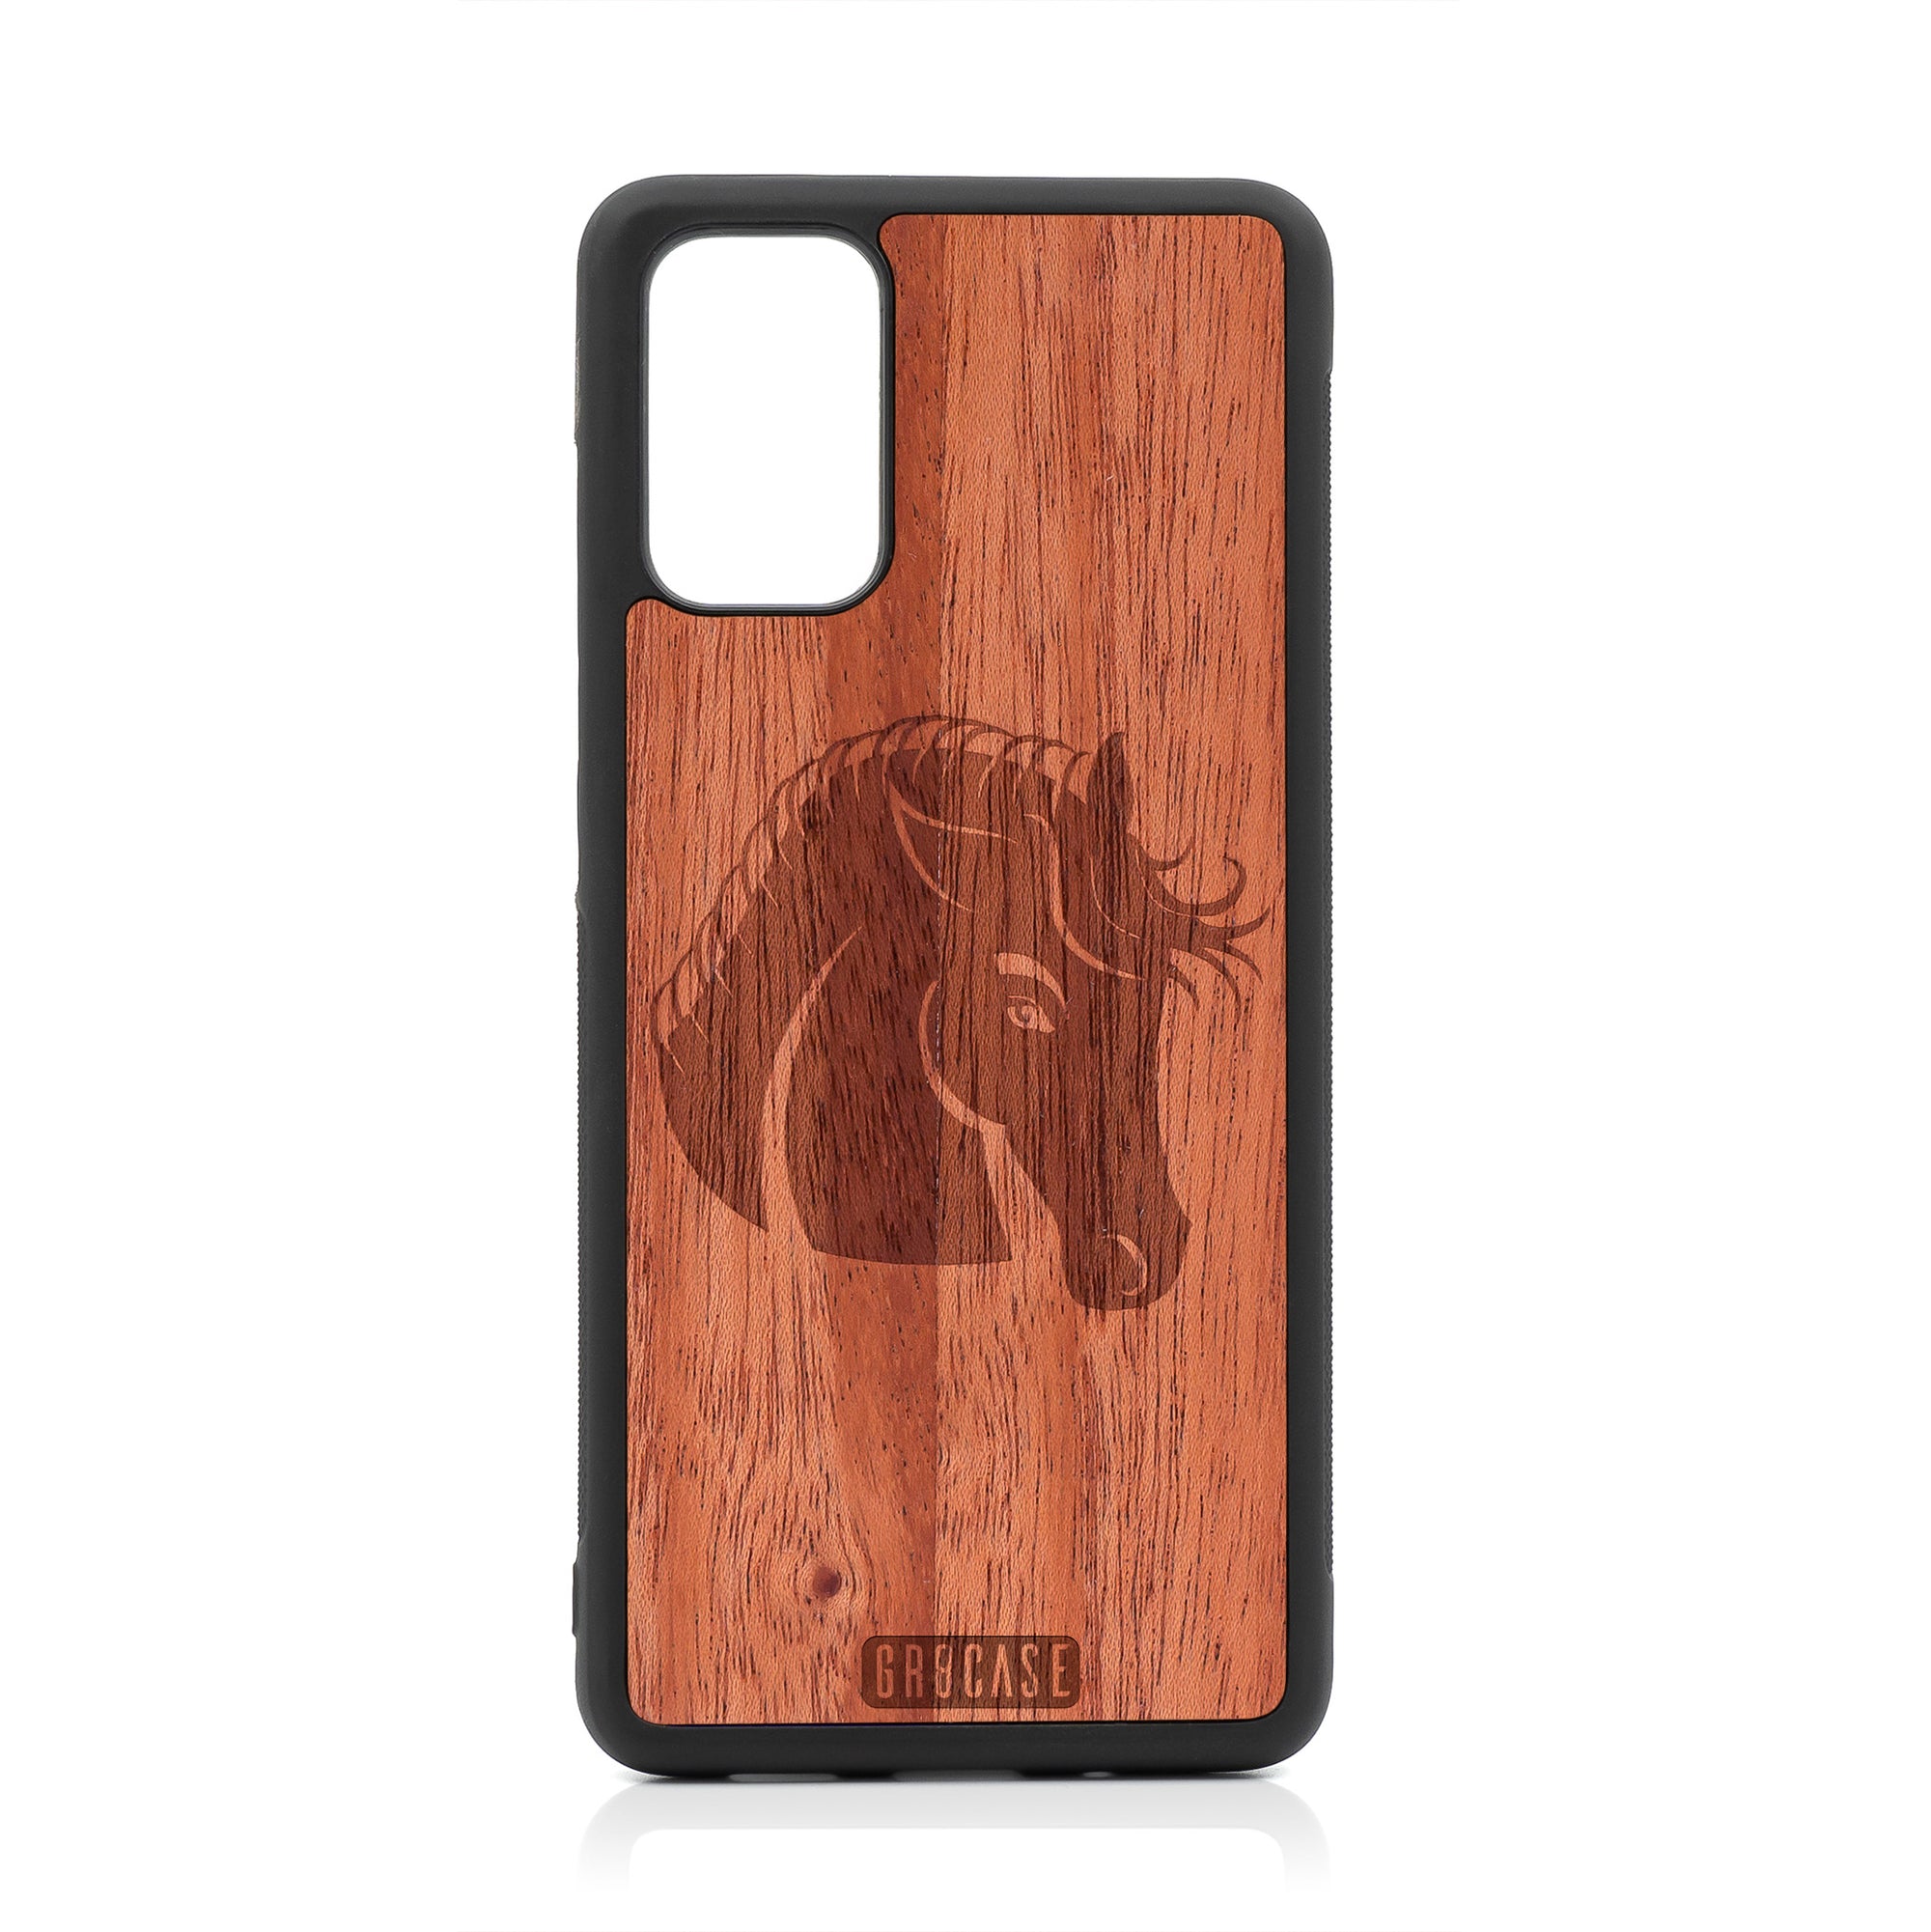 Horse Design Wood Case For Samsung Galaxy S20 Plus by GR8CASE